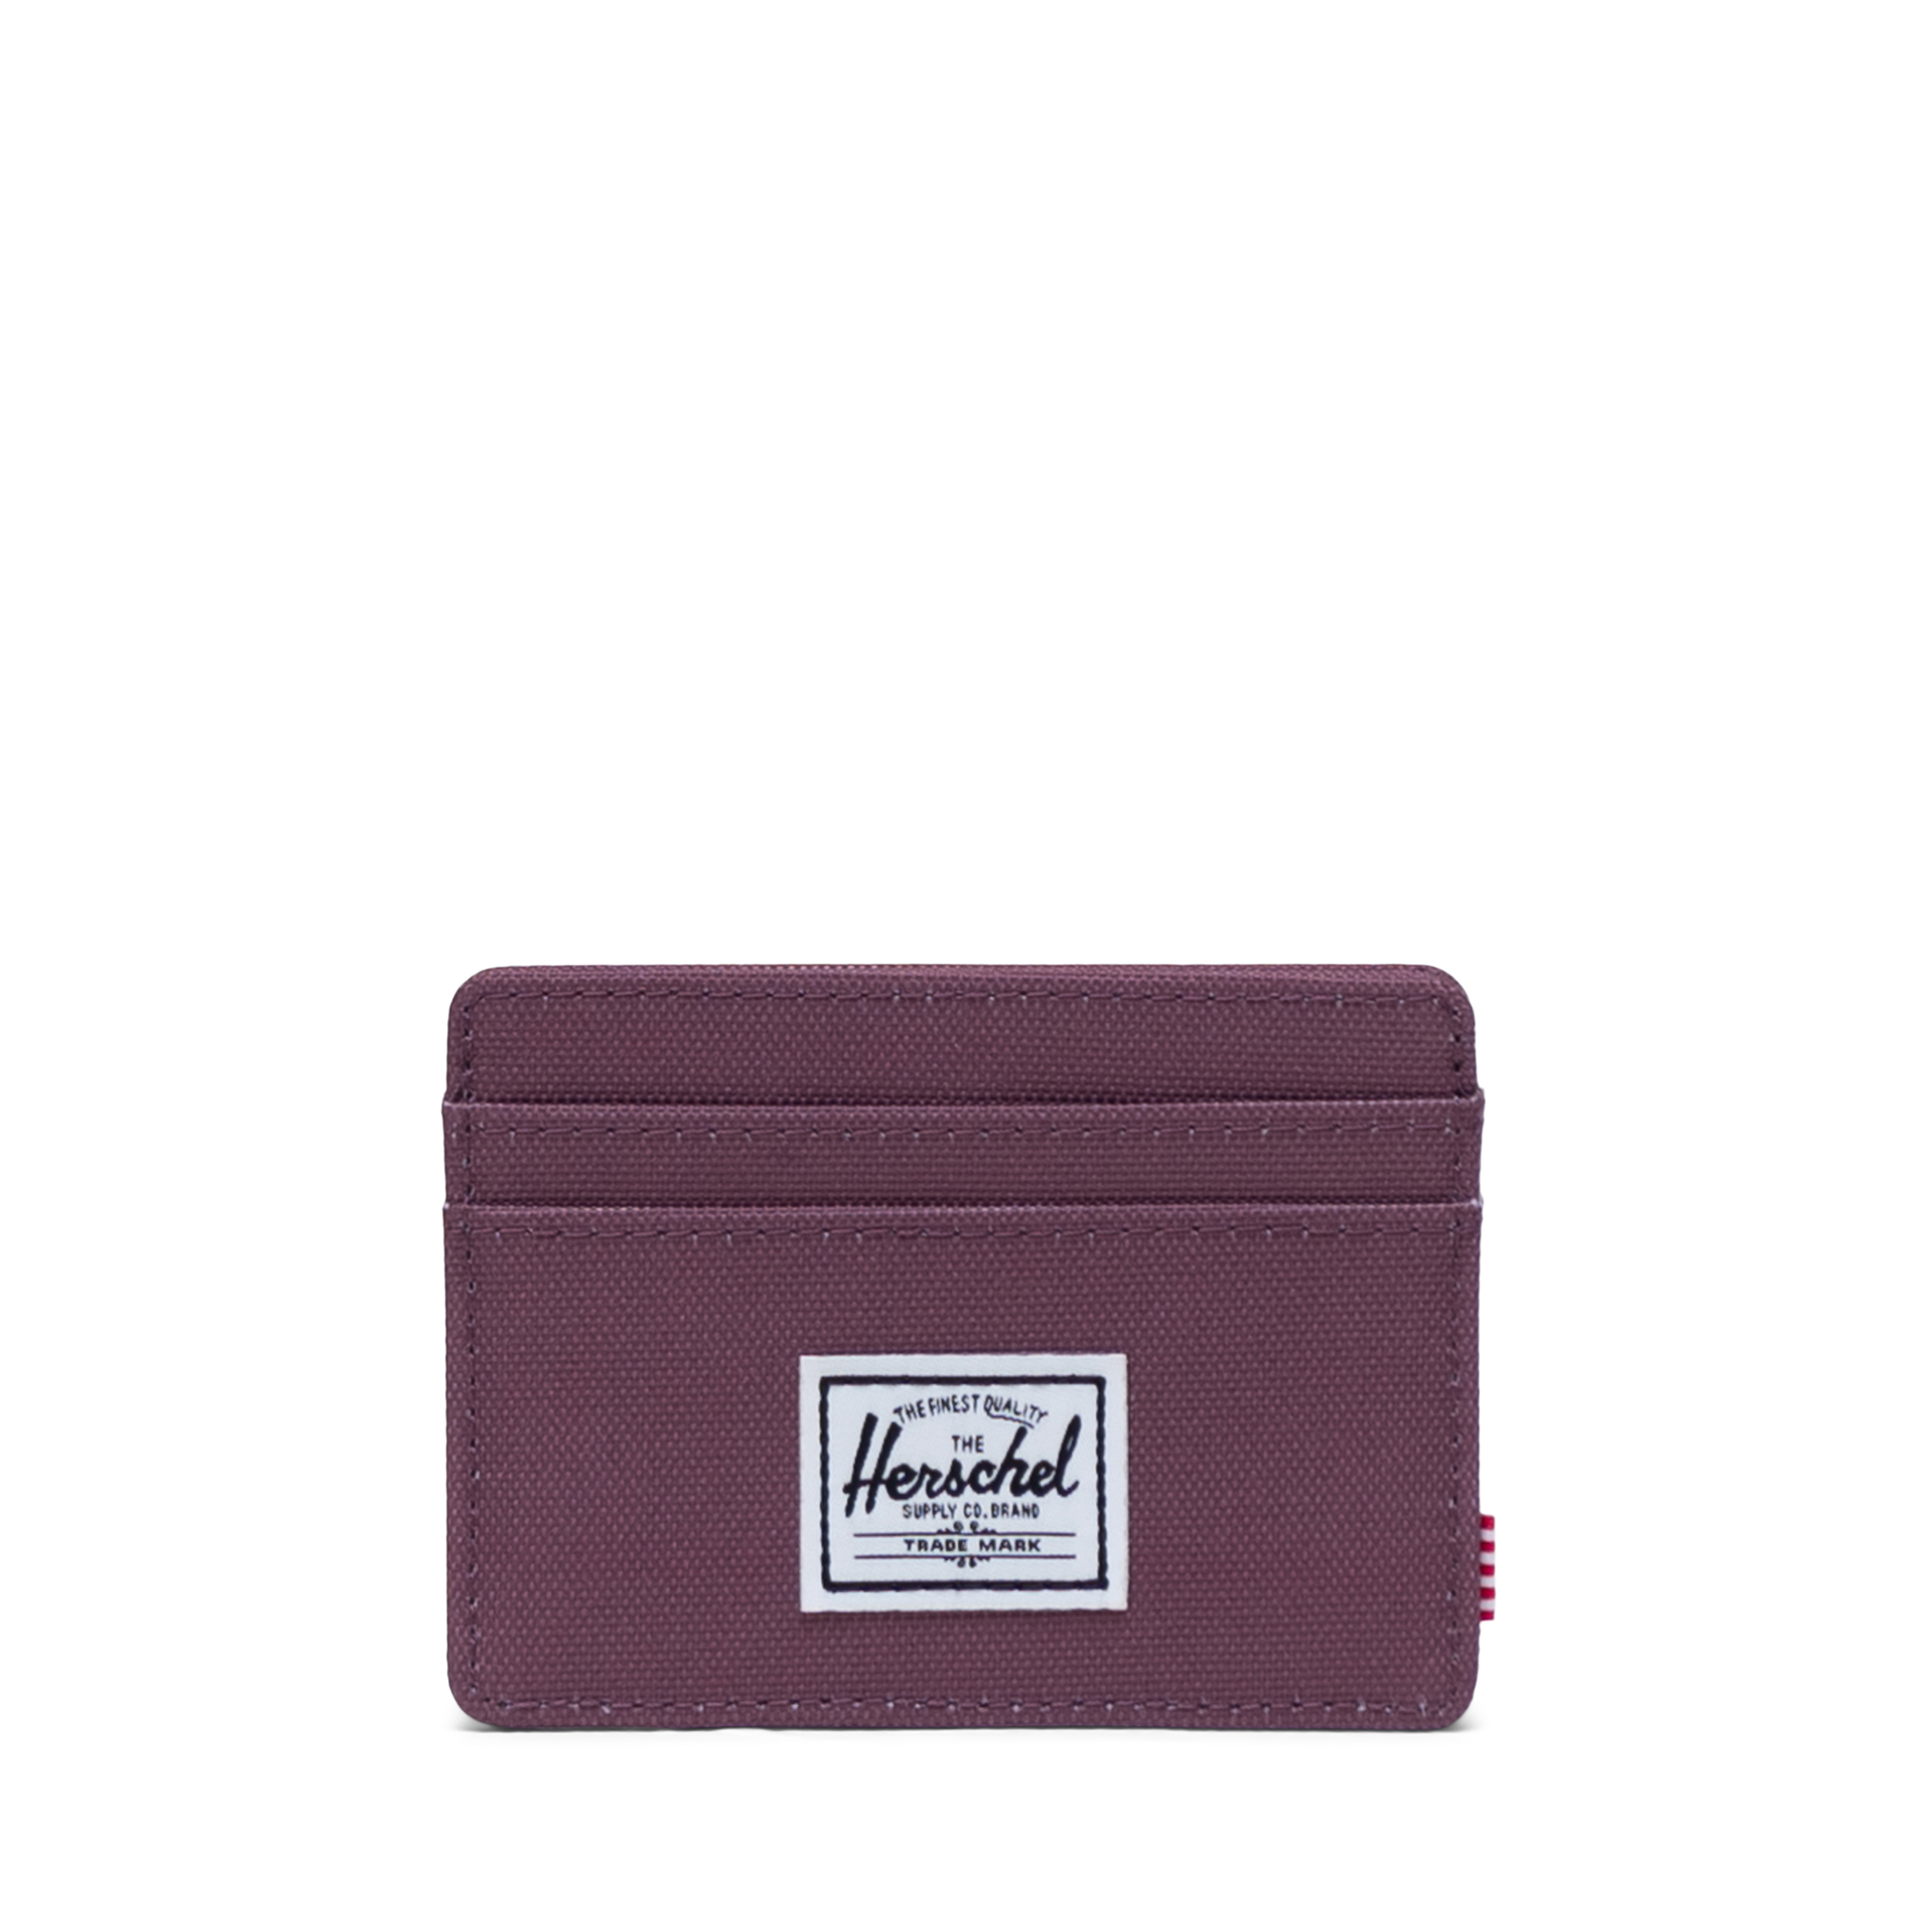 OPTEXX RFID Blocking Credit Card Holder Charly Pink made of Vegi Leather with OPTEXX Protection; Made in Germany 